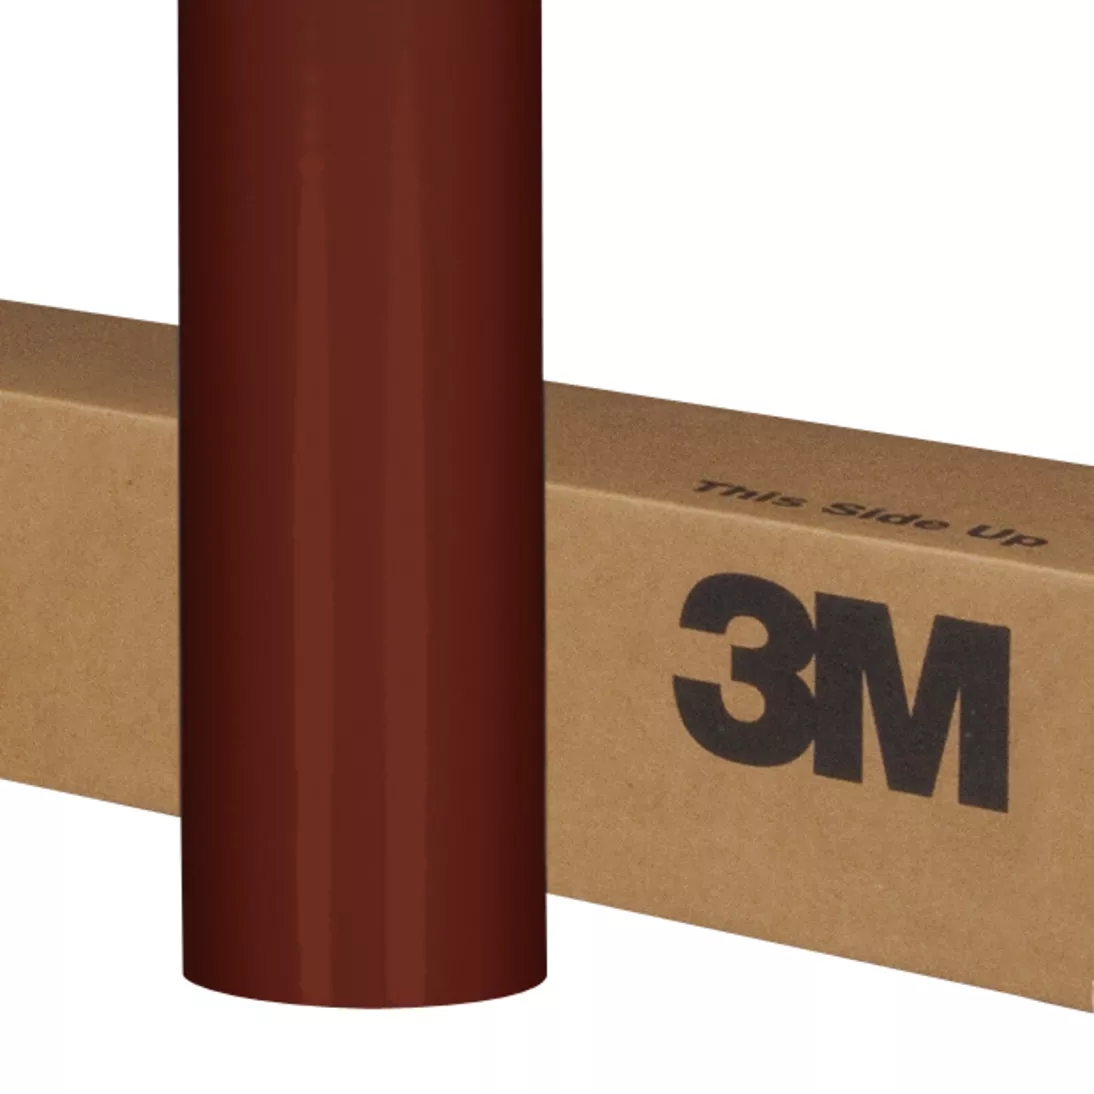 3M™ Scotchcal™ ElectroCut™ Graphic Film 7125-29, Russet Brown, 48 in x
50 yd